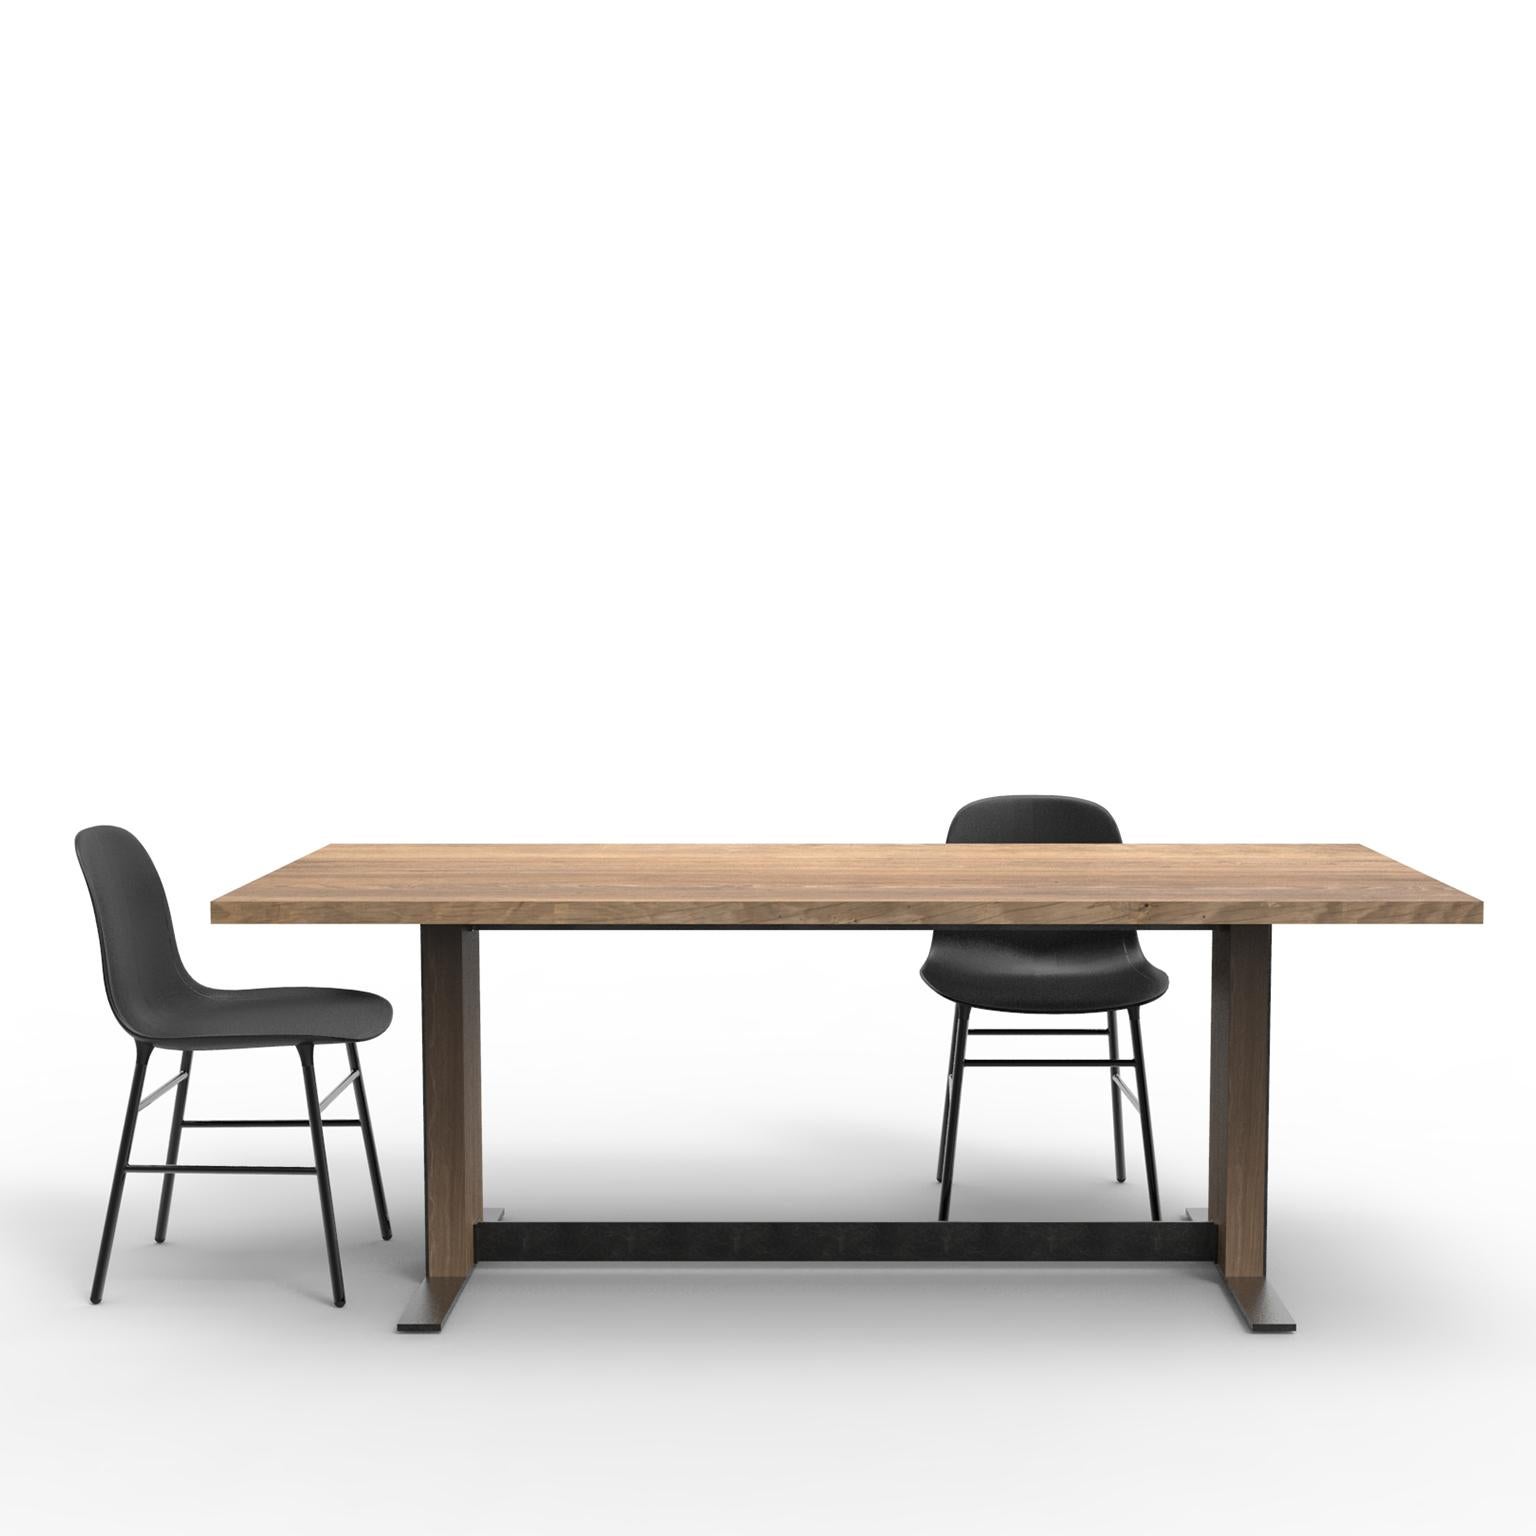 Set the tone of professionalism in your office with the Hilux Conference Table. No other material gives the look and feel of sophistication like solid North American hardwood. The table’s steel and wood base has been engineered for flexible seating